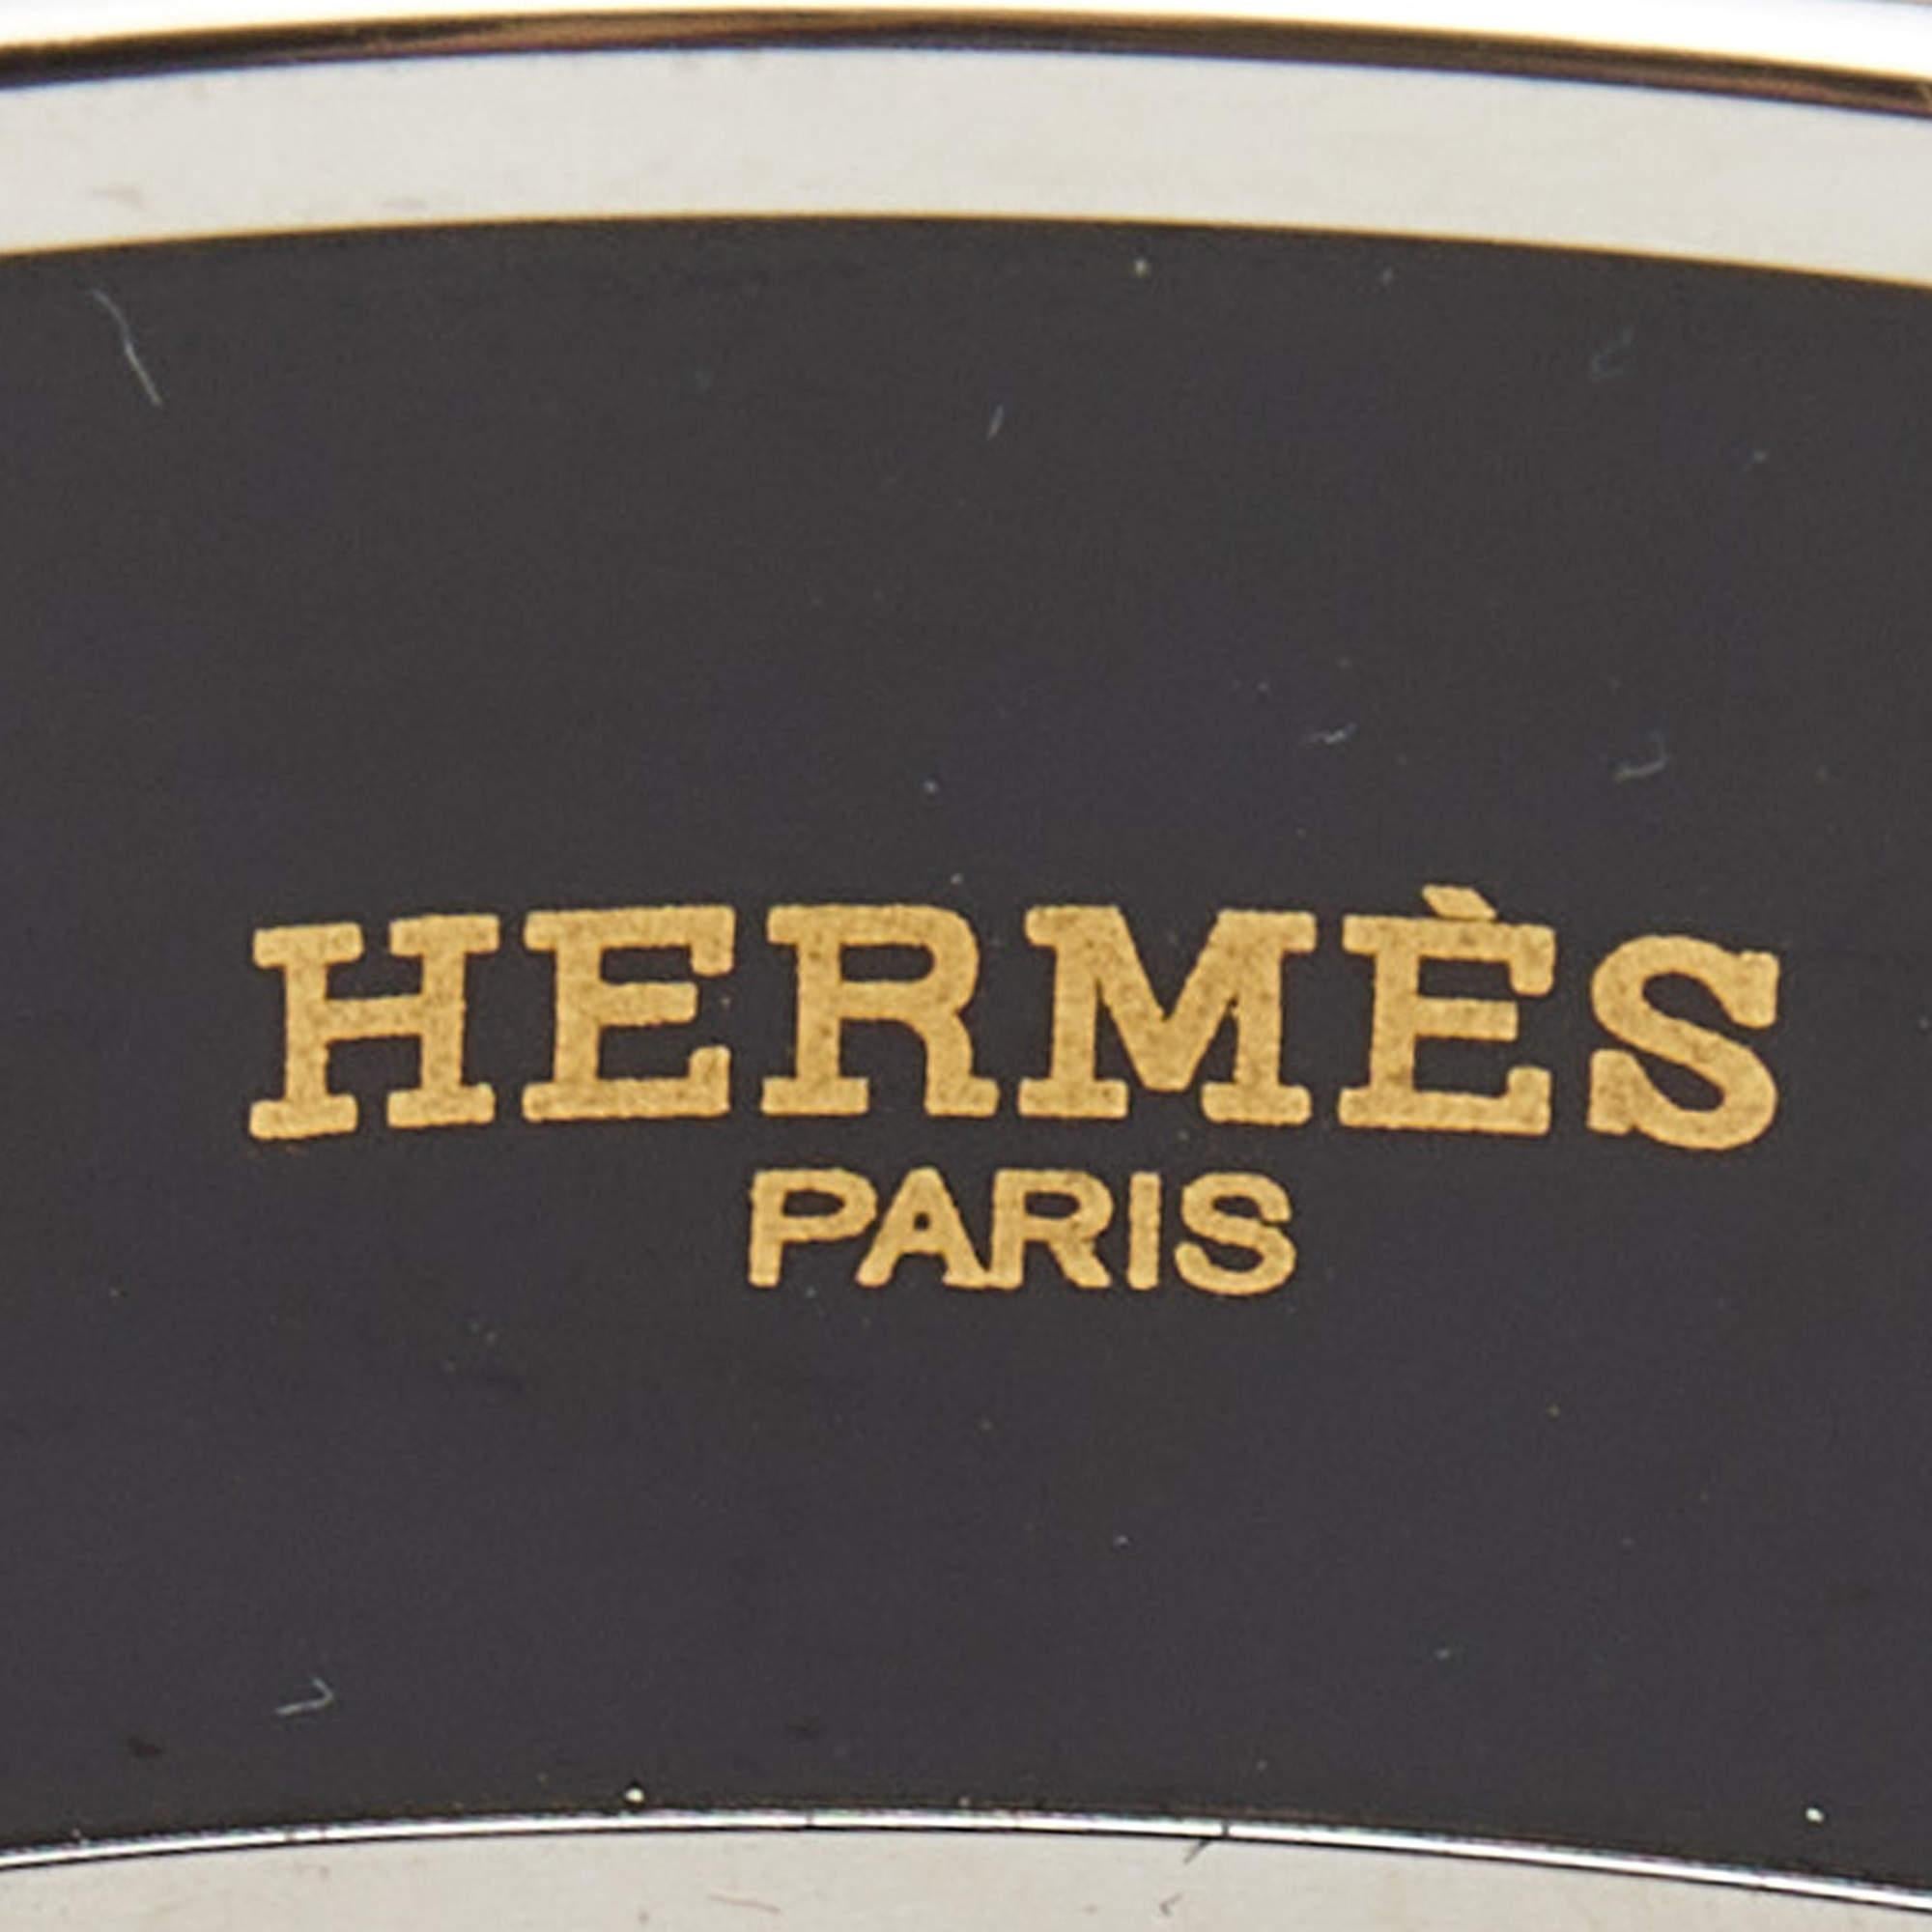 A classic Hermès bangle bracelet is so simple, effortless, and yet so chic and luxurious that it is worn over and over again once purchased. It never goes out of style. Constructed using palladium-plated metal, this bangle is beautified with